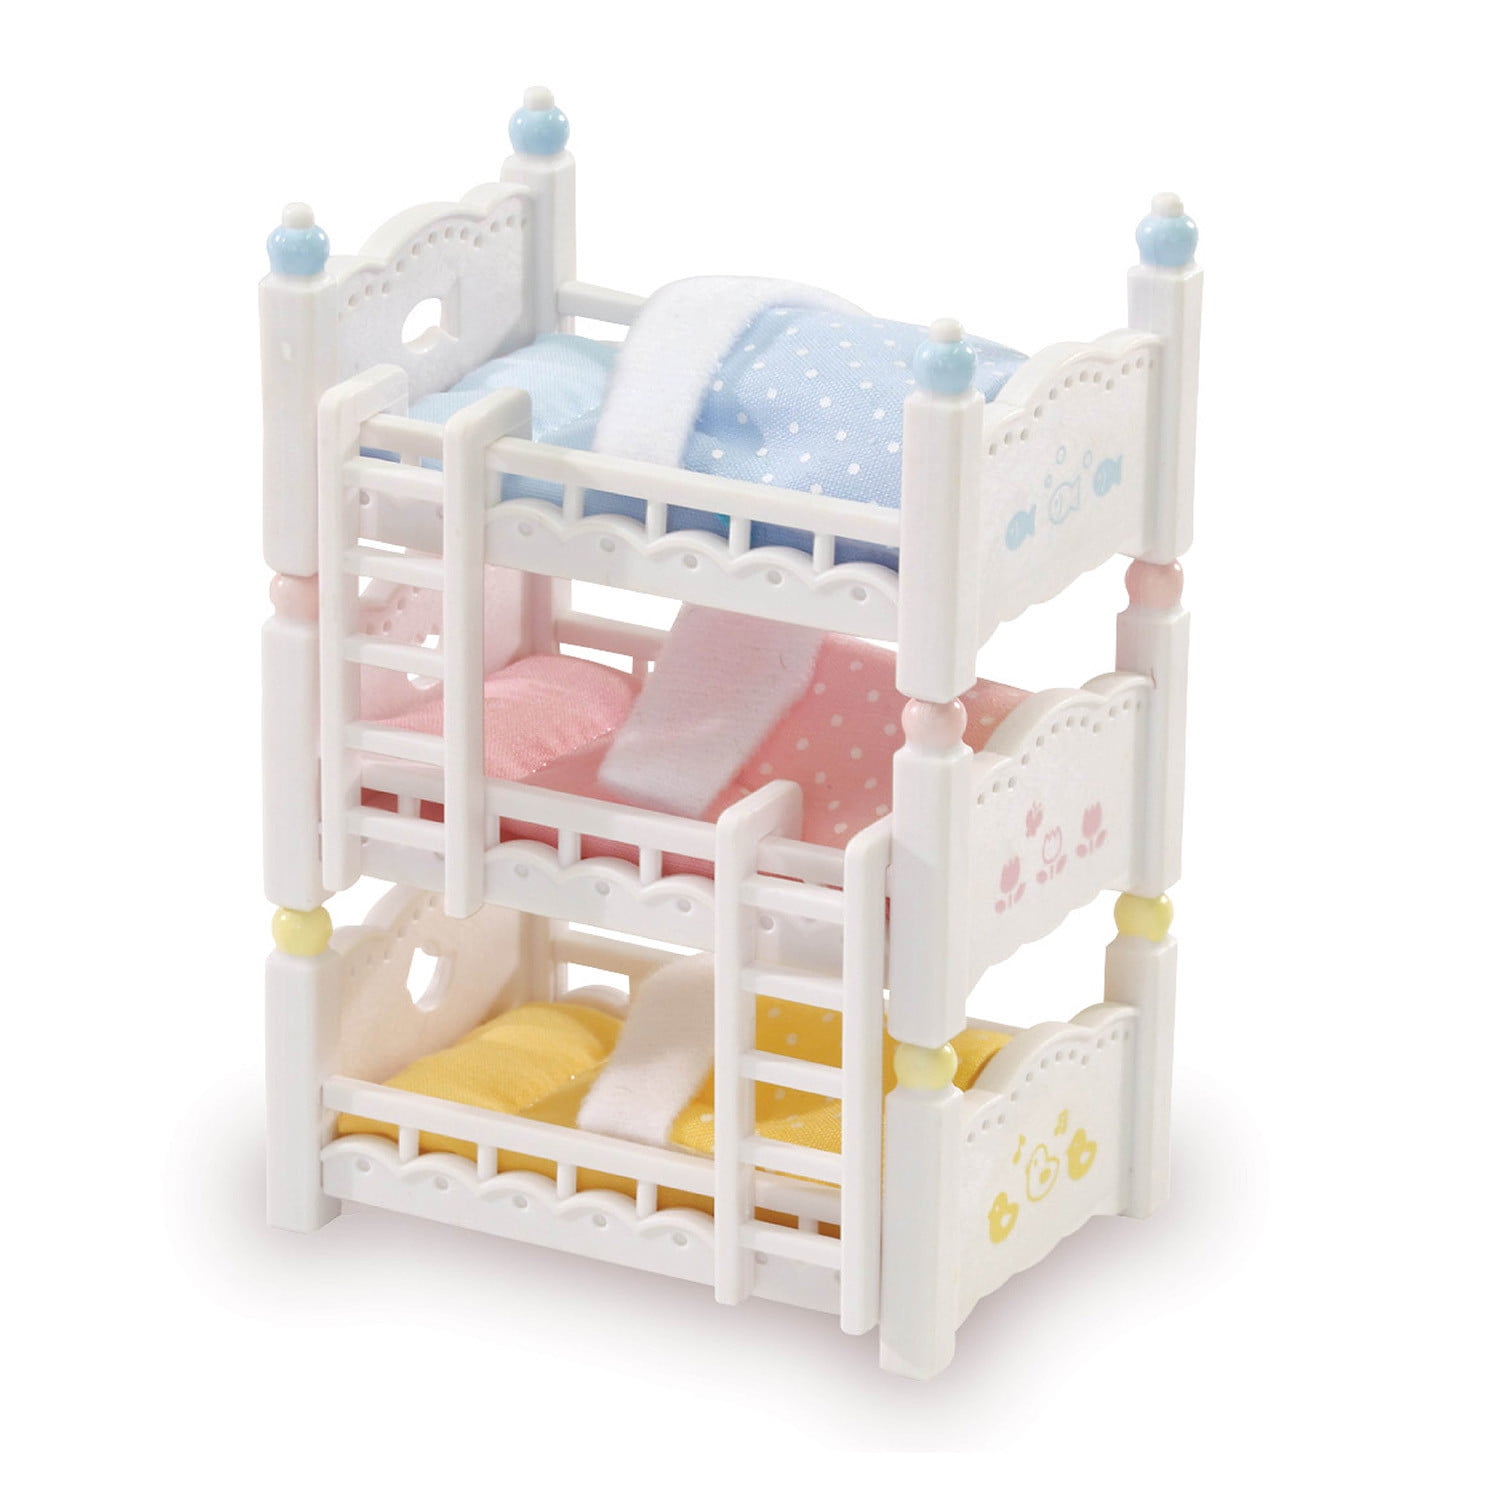 Calico Critters Triple Baby Bunk Beds Activity Toy For Kids Toddler Girls Gift 